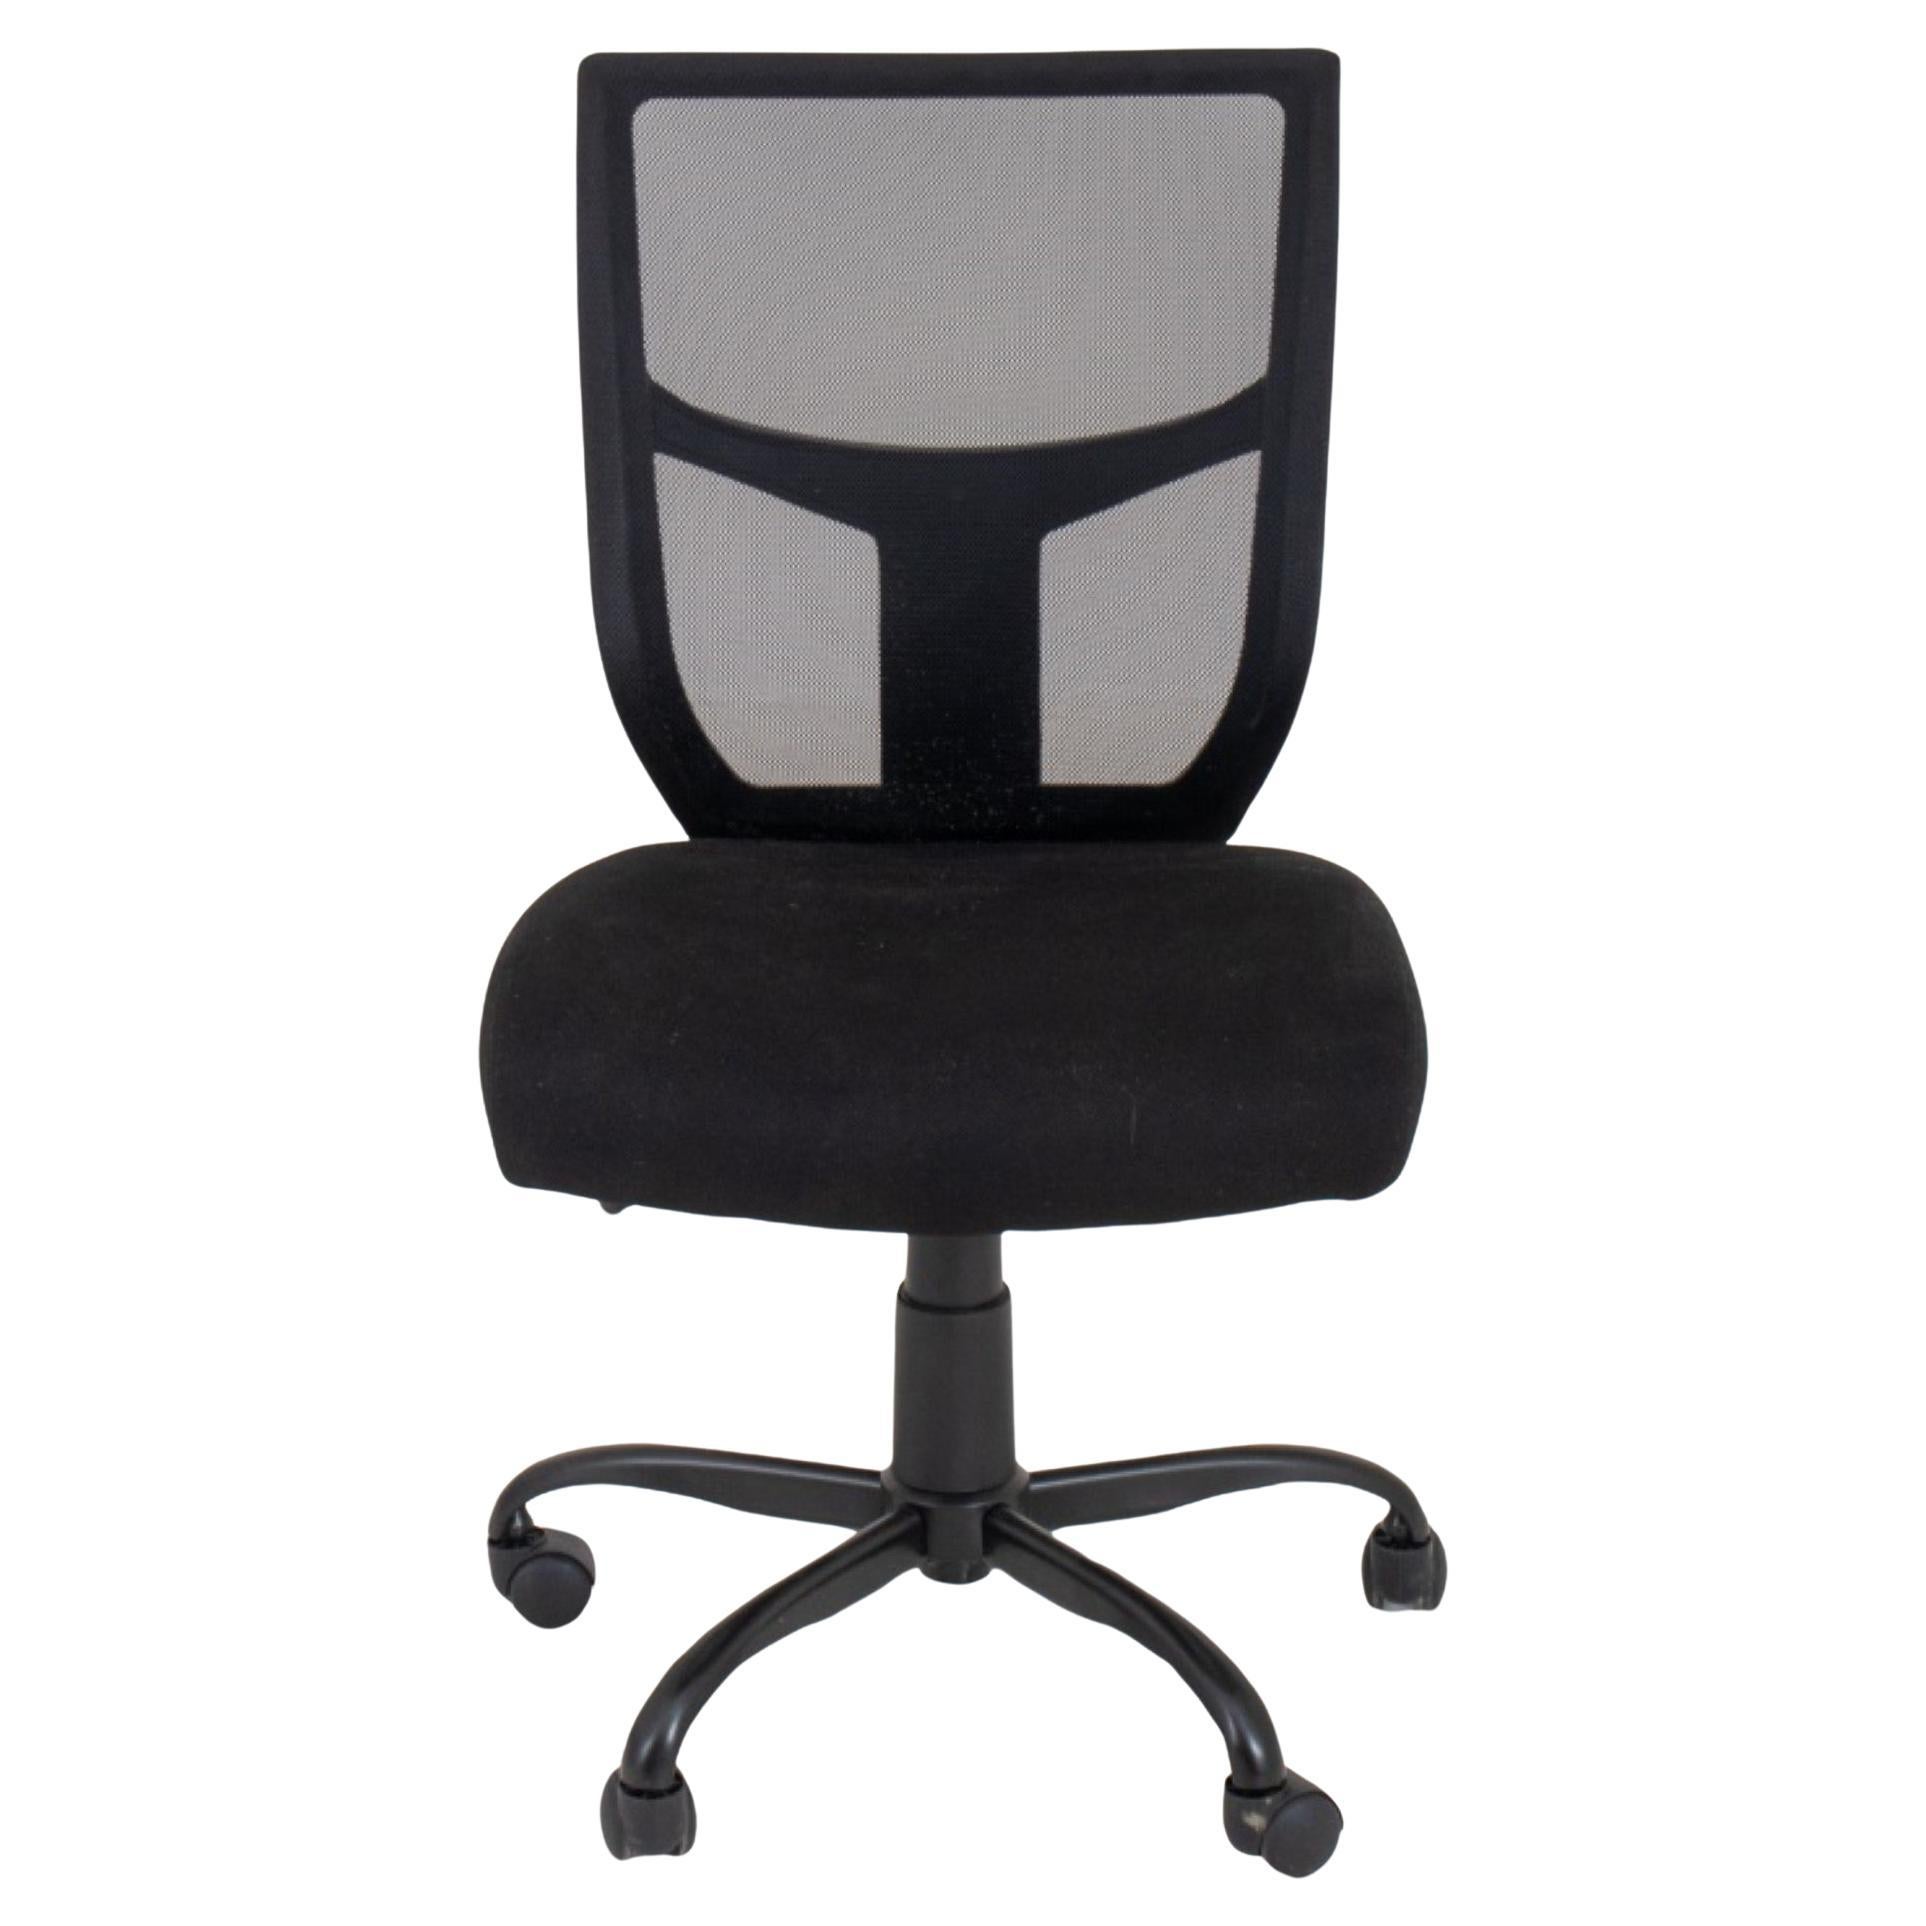 Black Fabric Office or Desk Chair For Sale